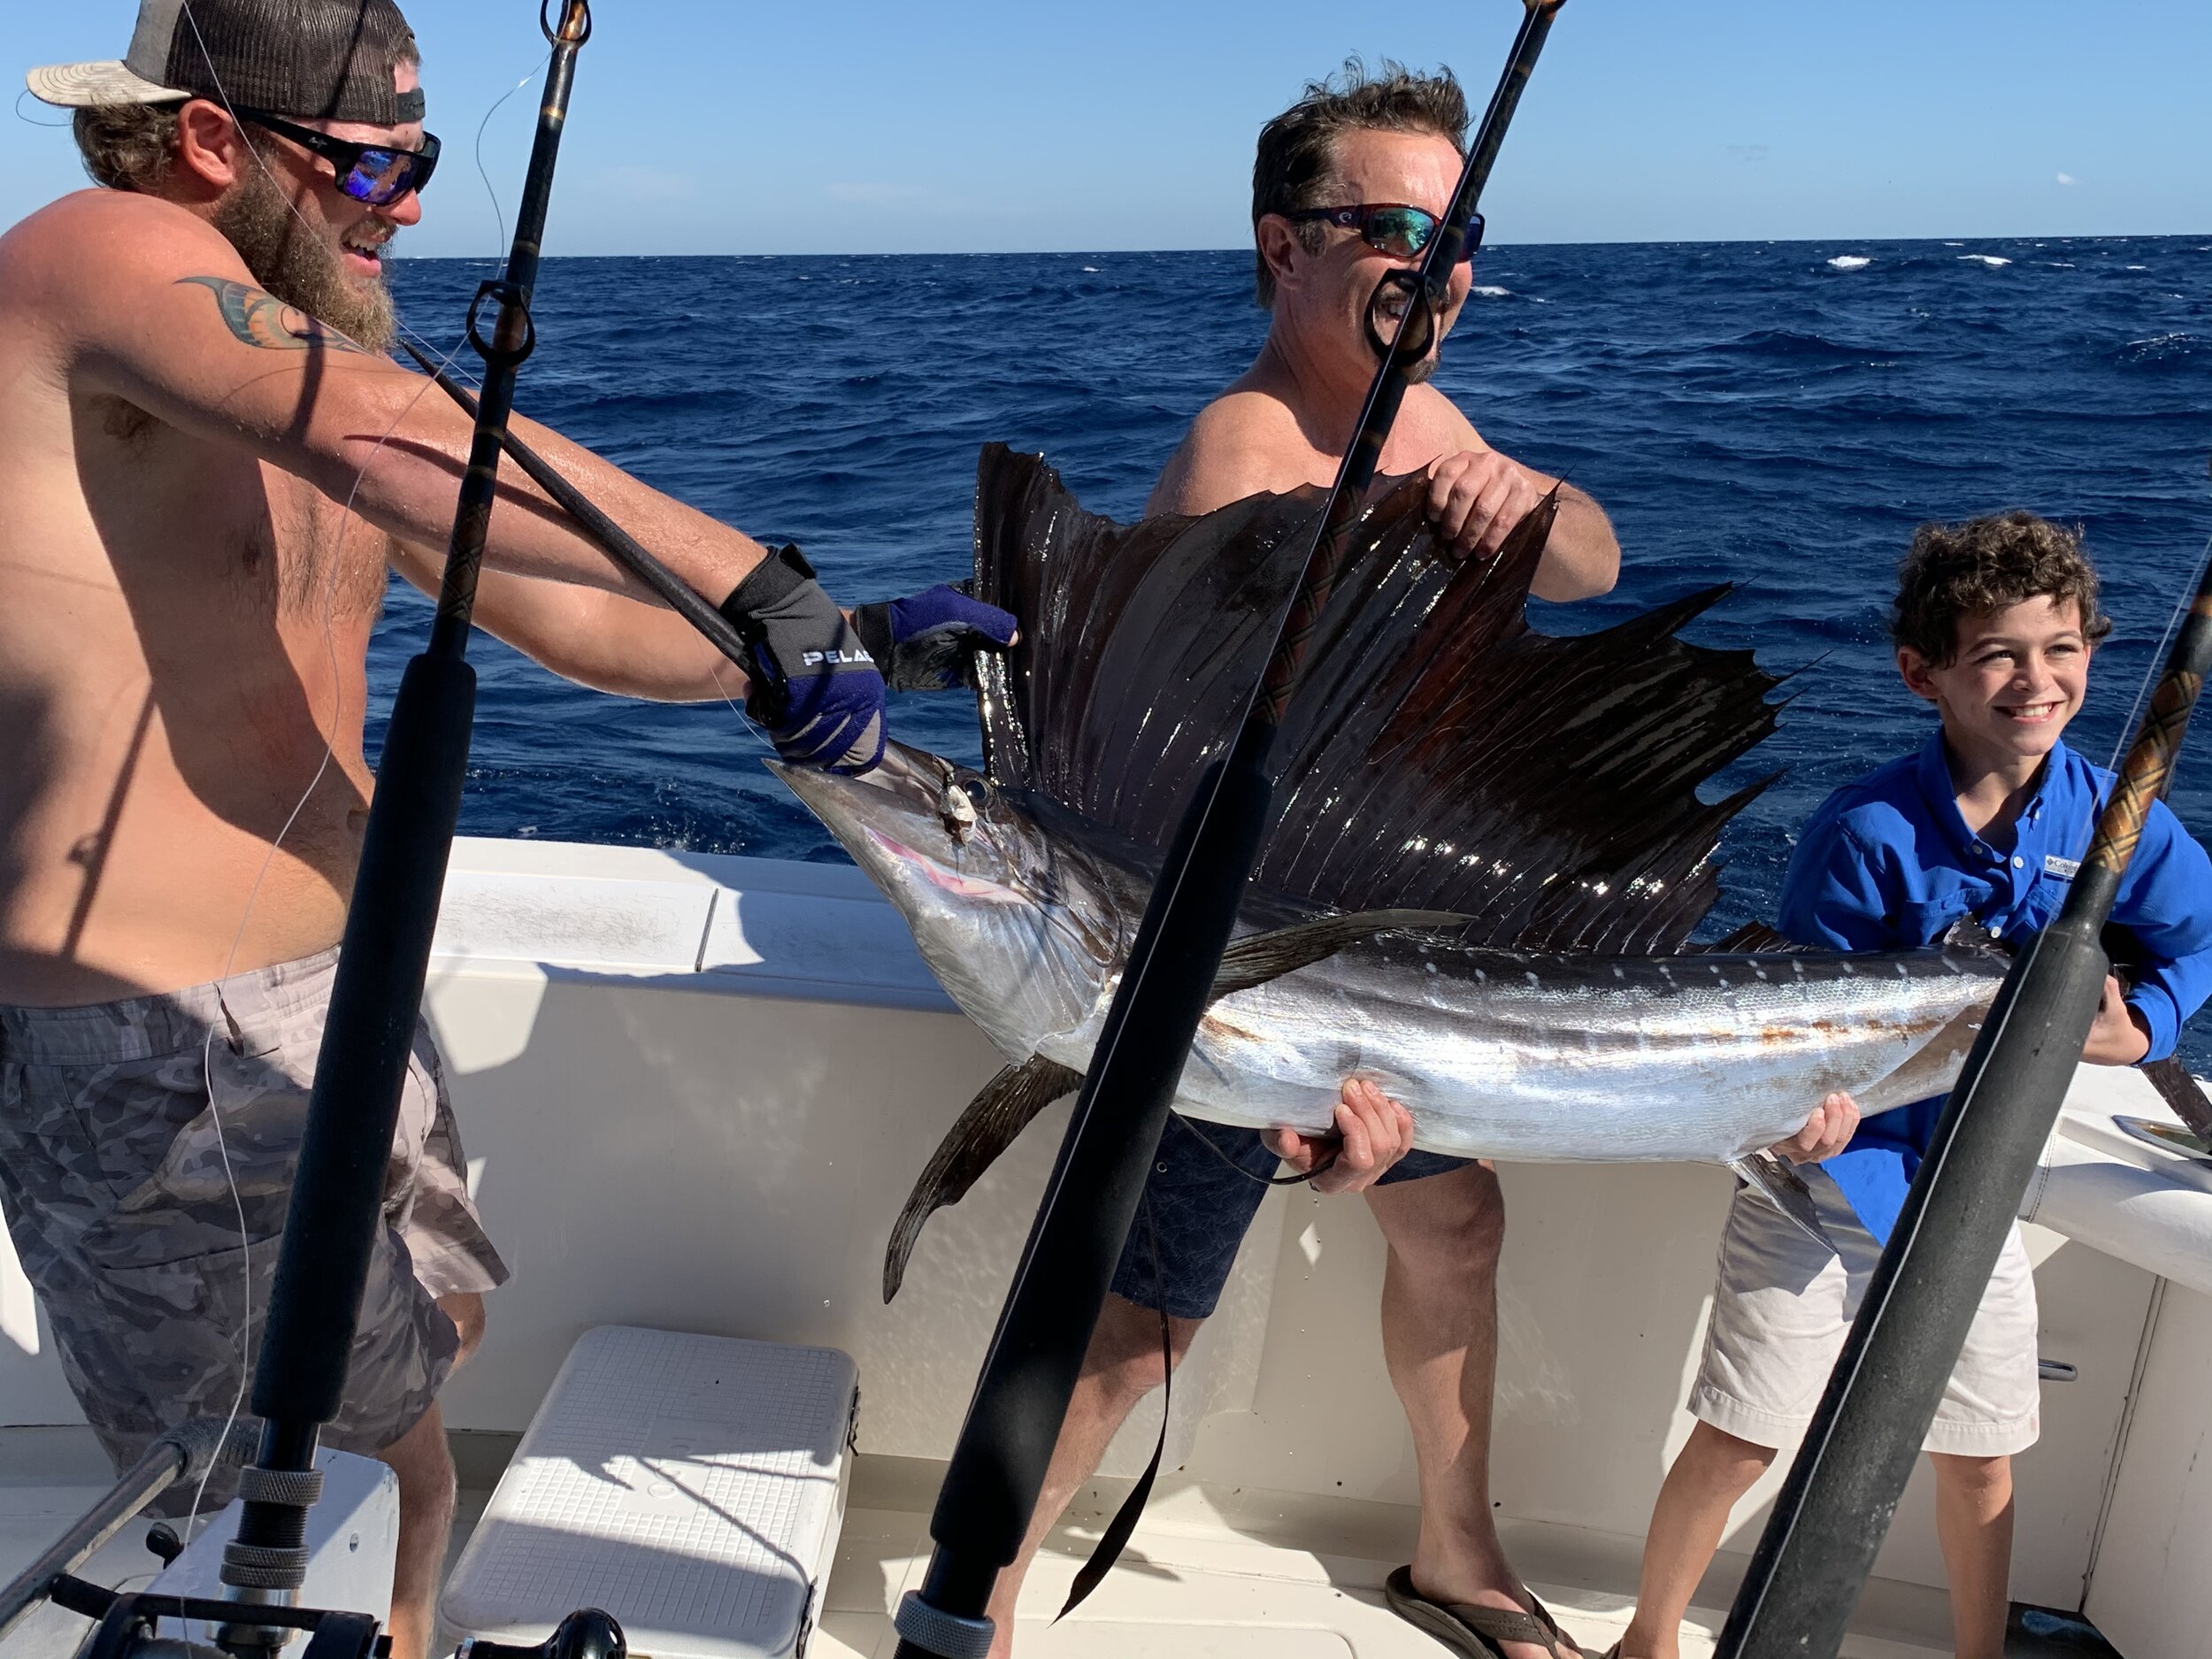 Howard's Grandson, Tripp, catching his first sailfish, which was measured and released.